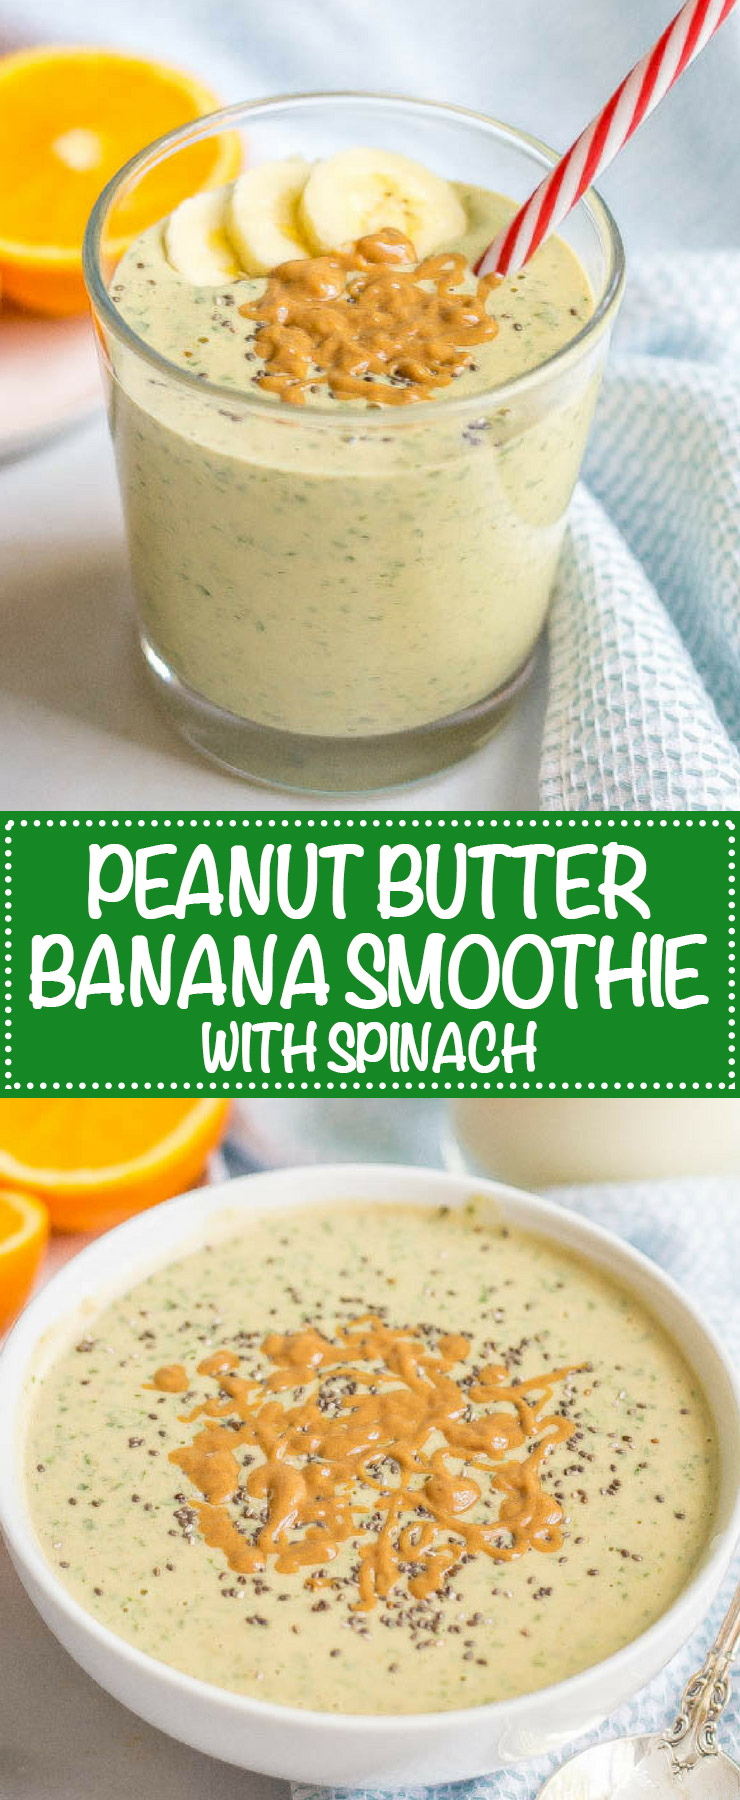 Peanut butter banana smoothie with spinach is a healthy breakfast or snack and full of wholesome ingredients! You can make it as a smoothie or smoothie bowl and dress it up with some fun toppings! | www.familyfoodonthetable.com